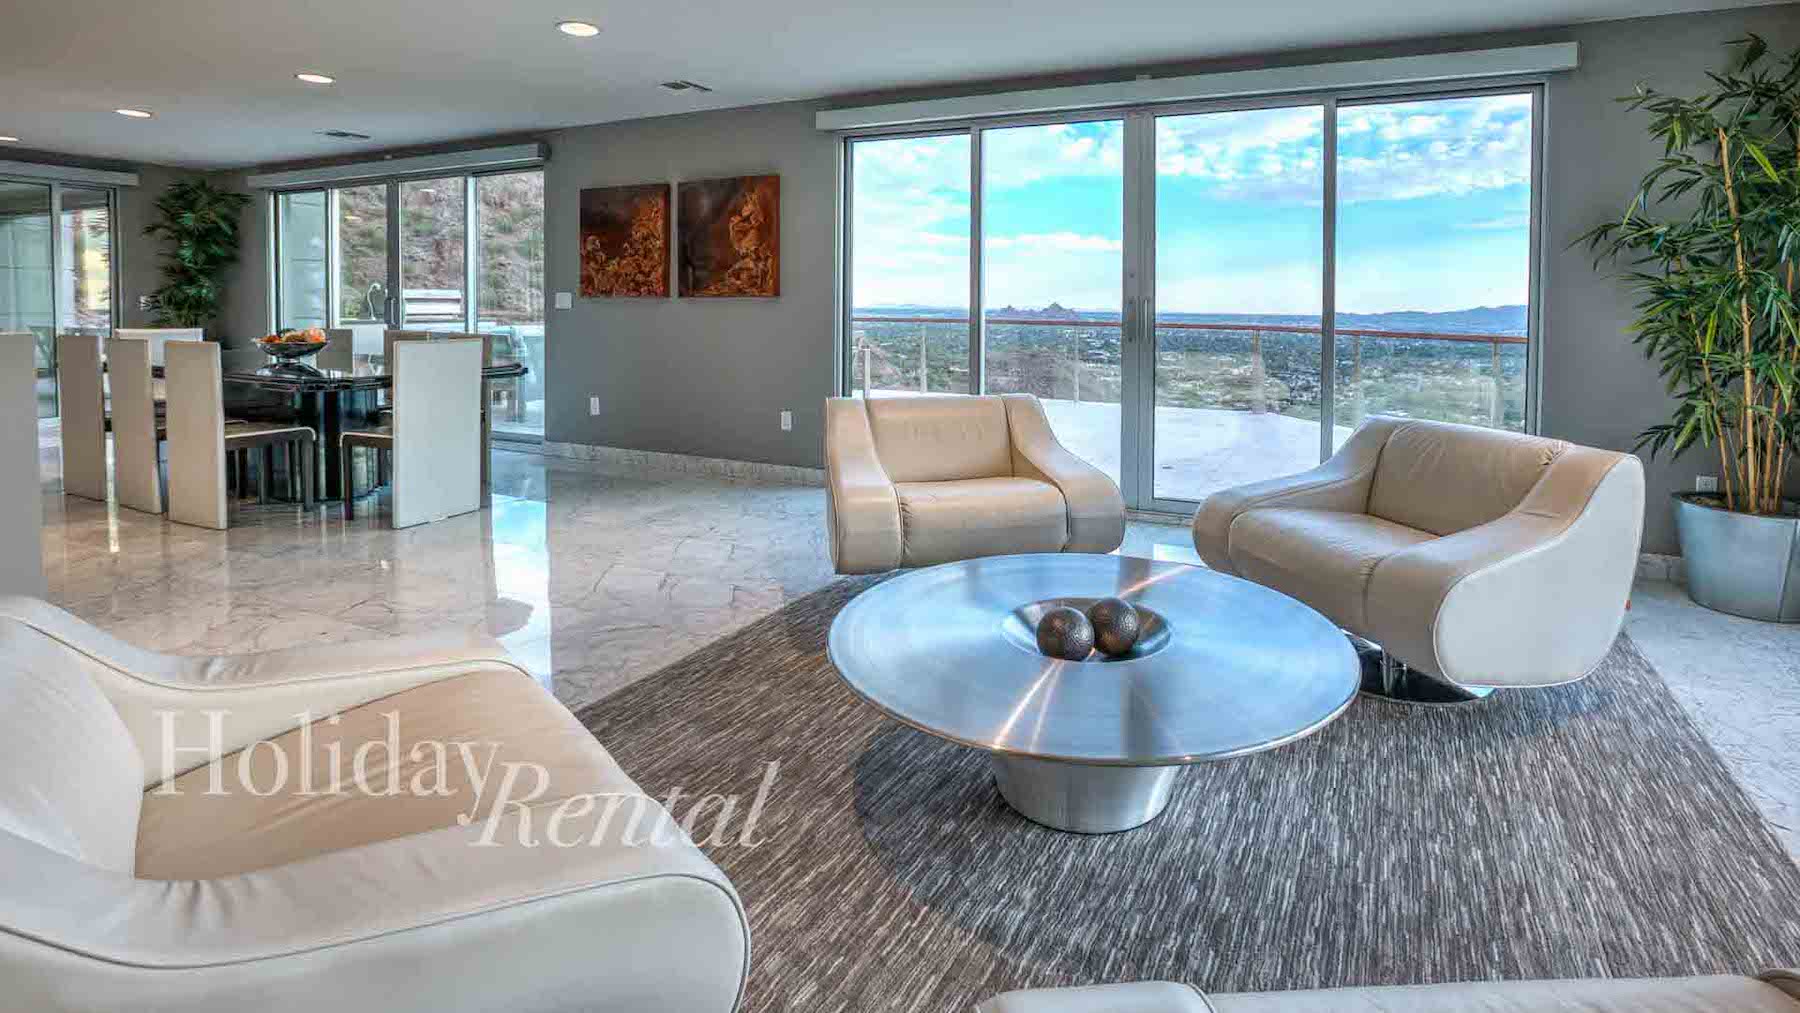 stunning living space vacation rental on camelback mountain